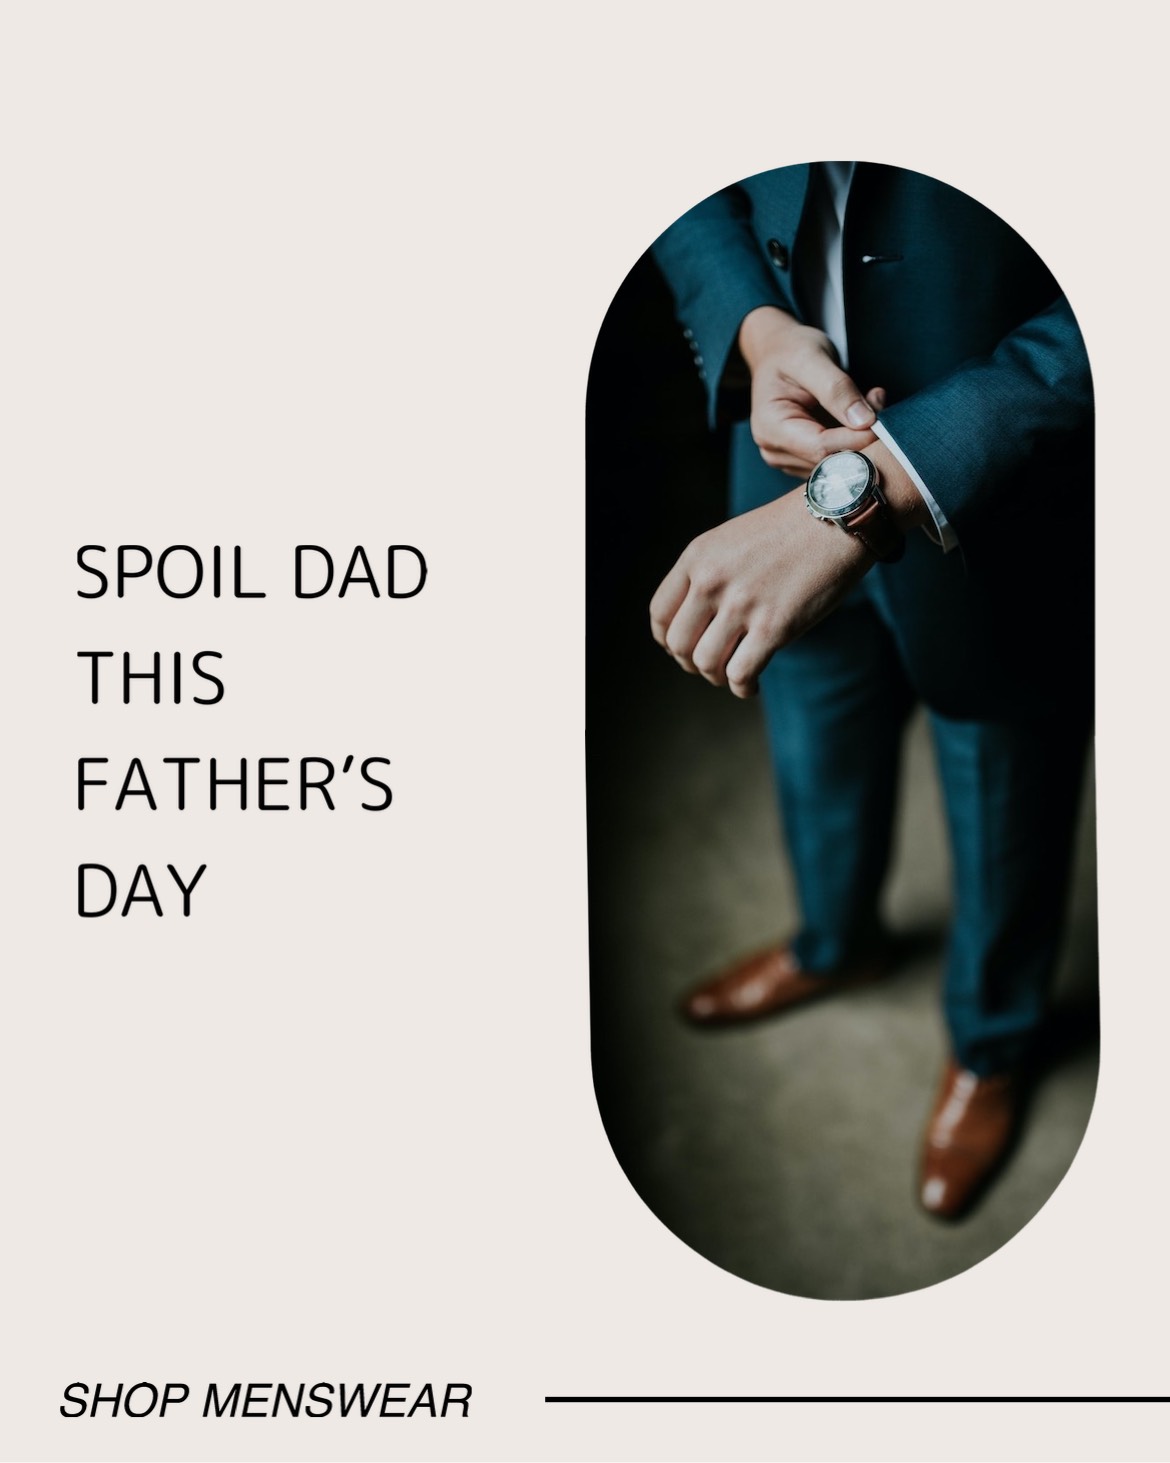 A Man In A Suit And Tie With A Watch On His Wrist Father S Day Template